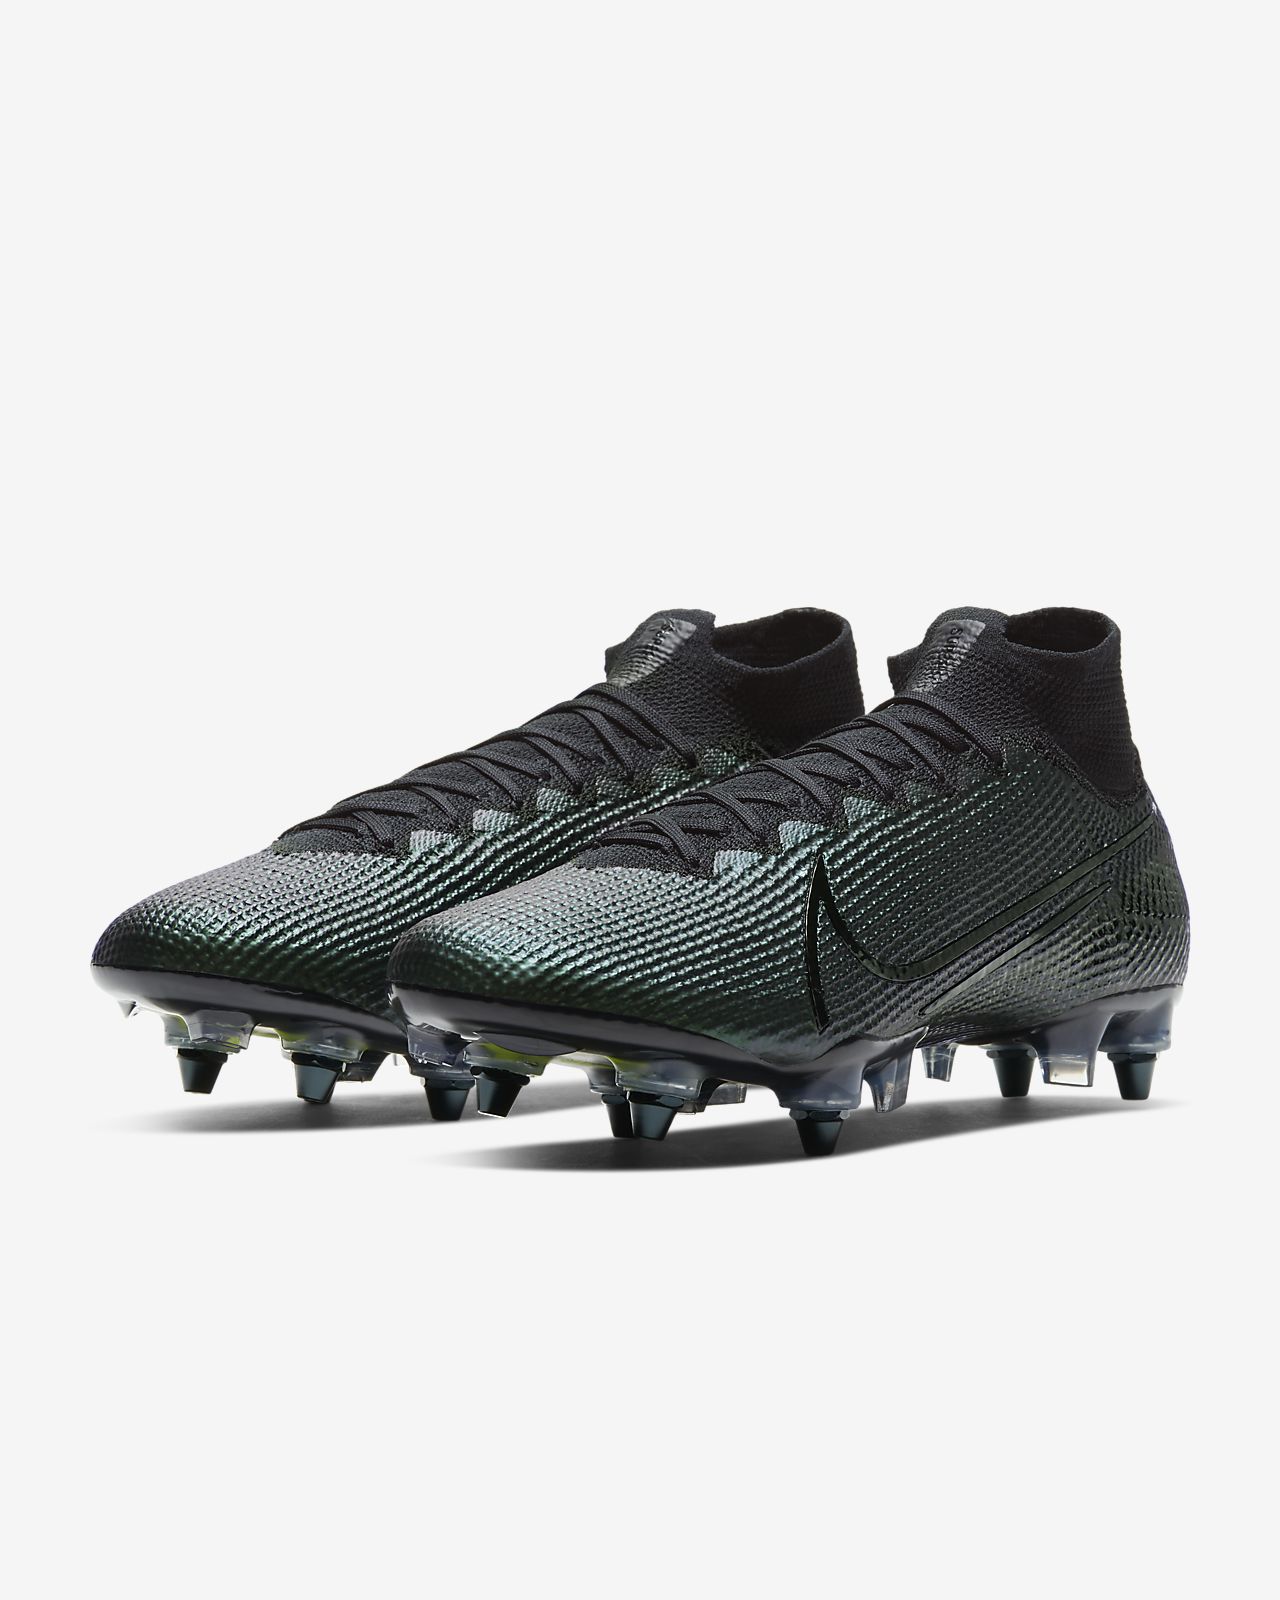 Buy 2 OFF ANY nike mercurial superfly 6 nigerian CASE AND GET 70.